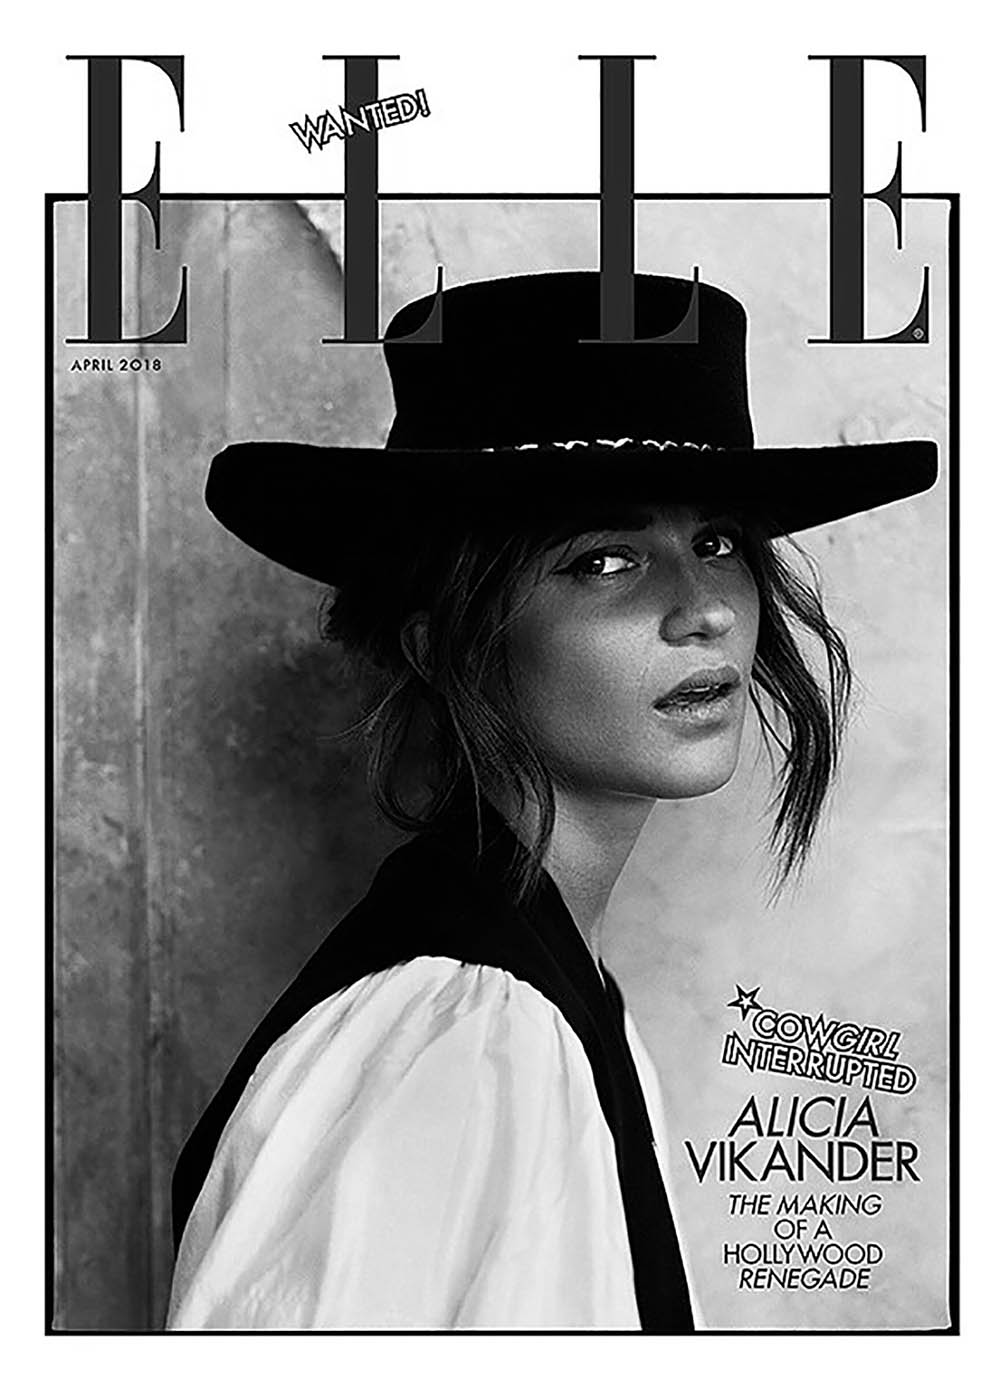 Alicia Vikander covers Elle UK April 2018 by Norman Jean Roy